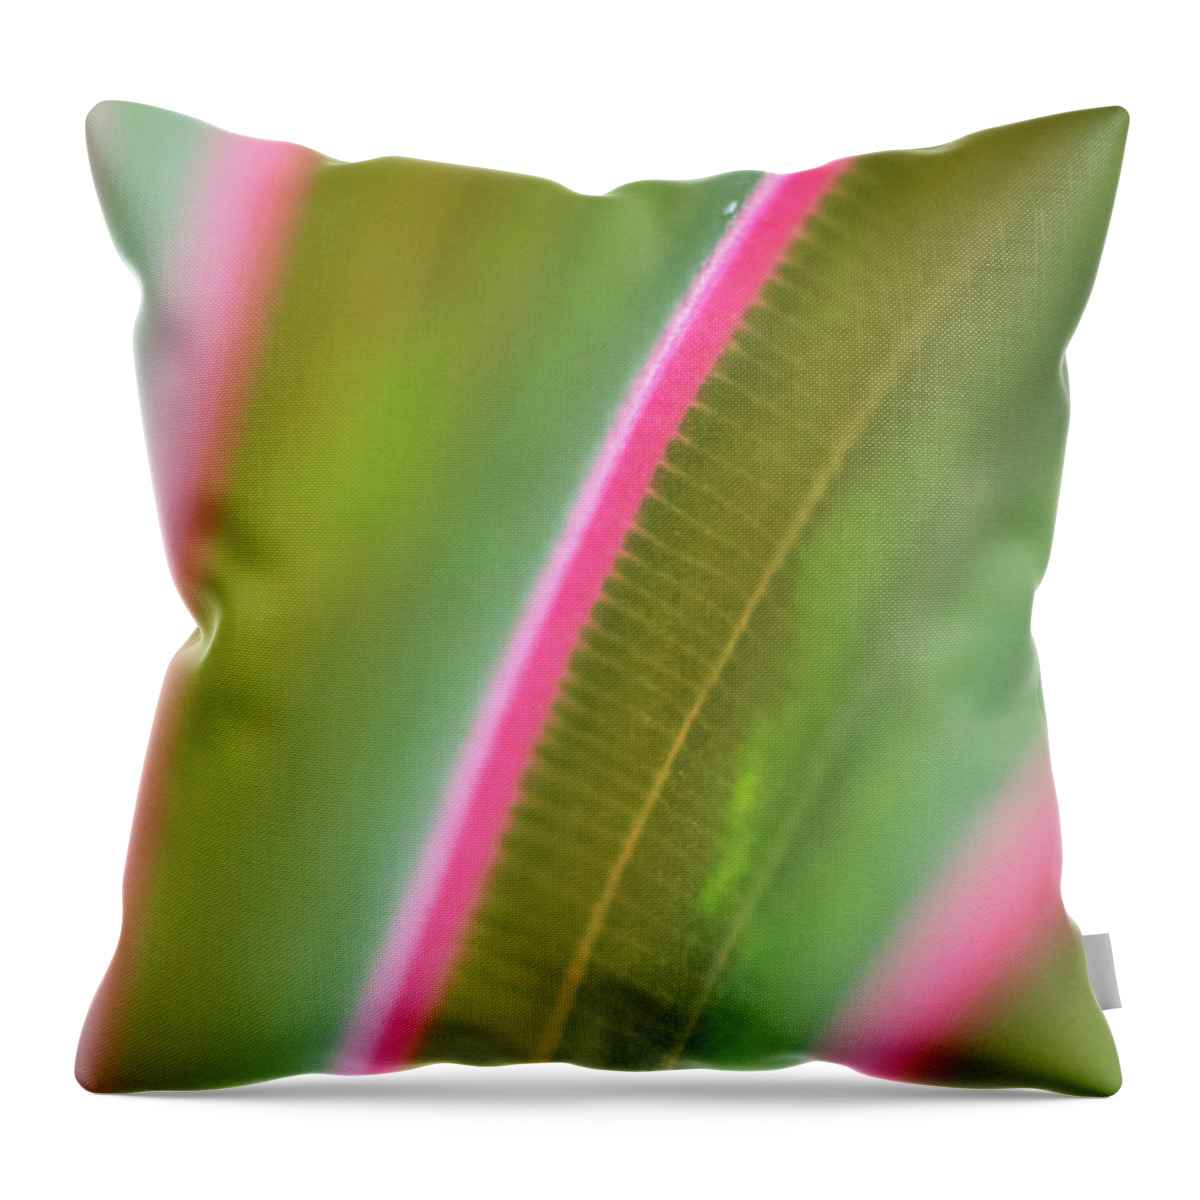 Curve Throw Pillow featuring the photograph Curves From A Prayer Plant Leaf by Phil And Karen Rispin